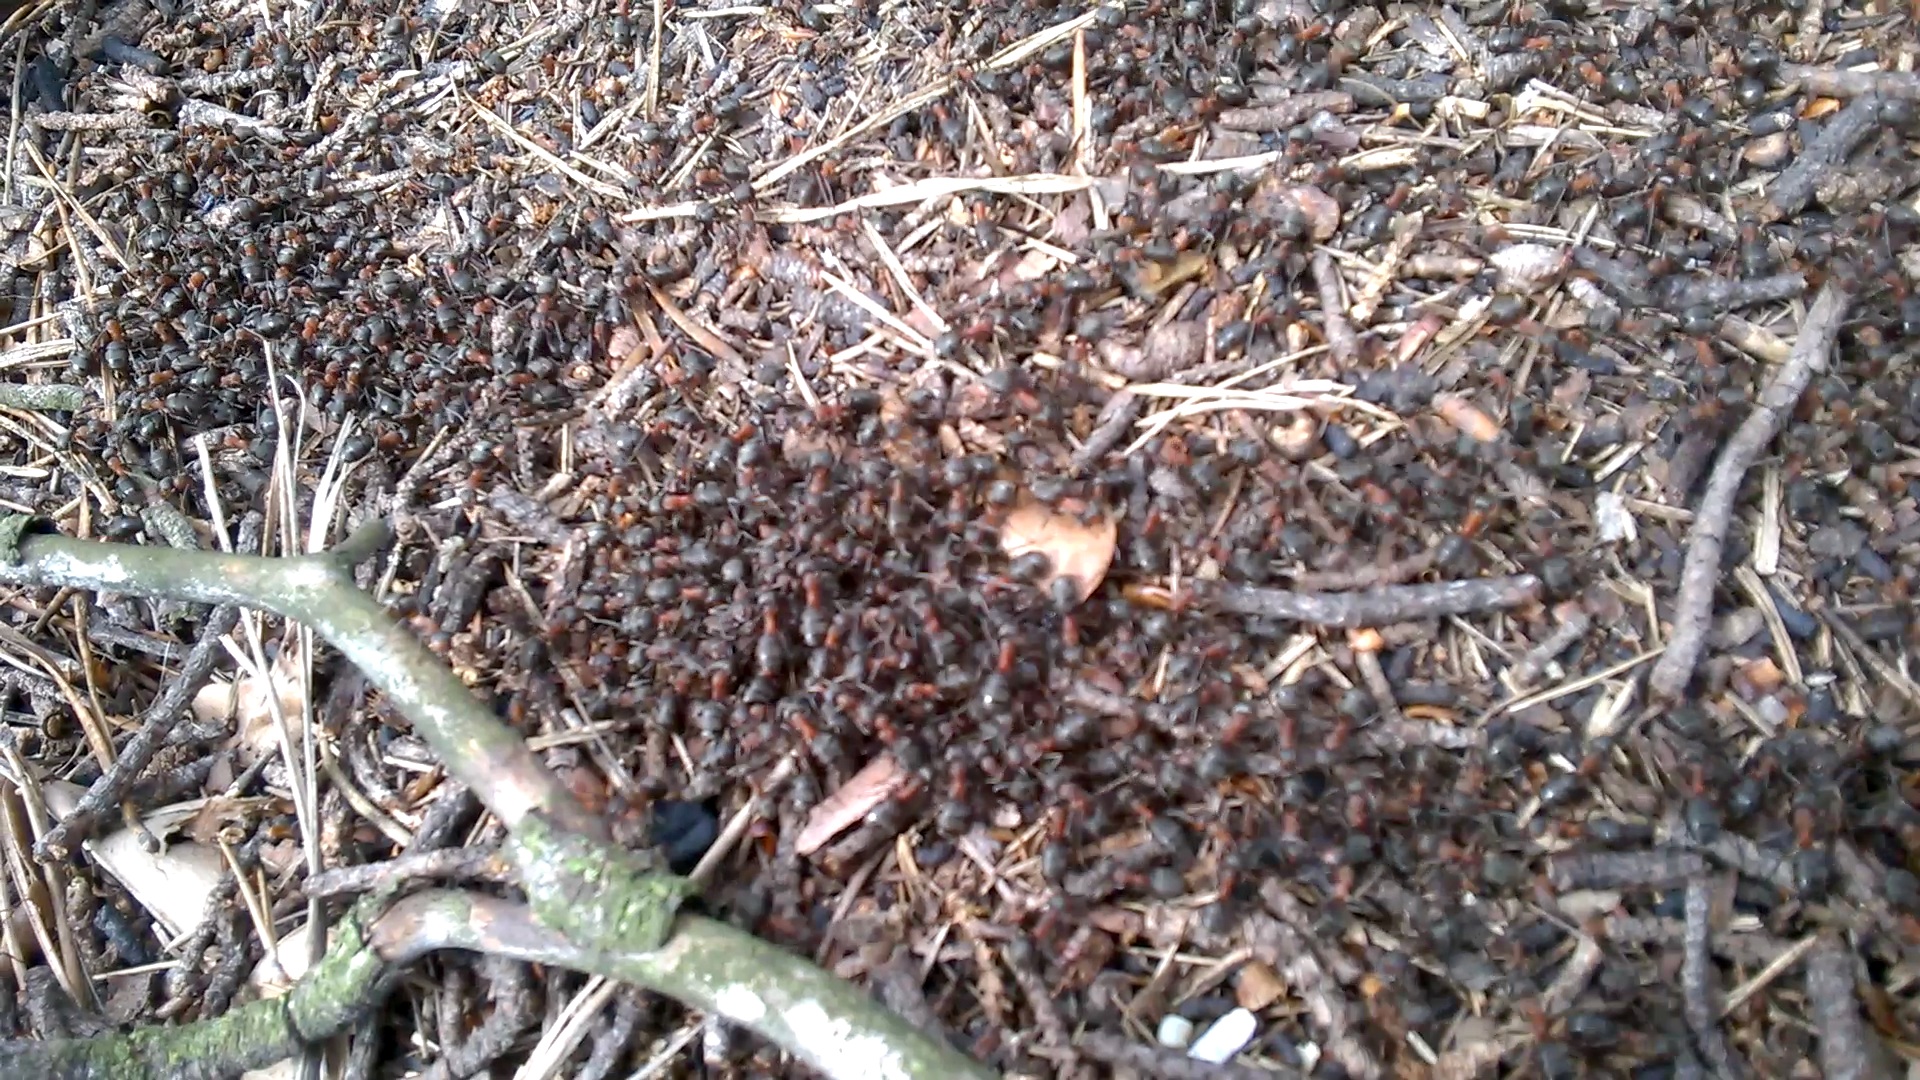   . Ants and formicary